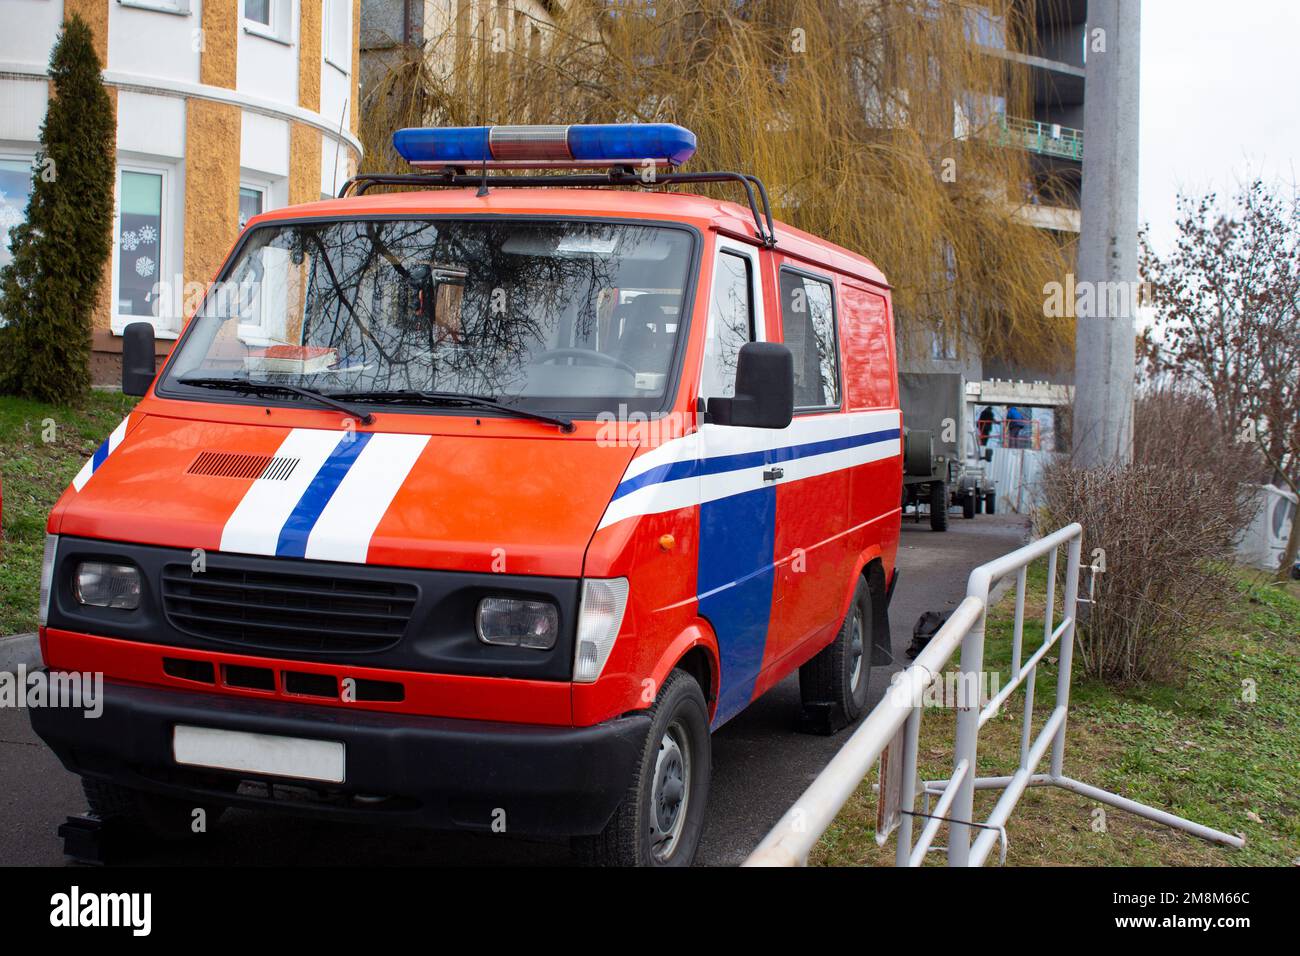 Red Rescue Vehicle. Rescue team parks its rescue vehicle for fire safety inspection. Stock Photo